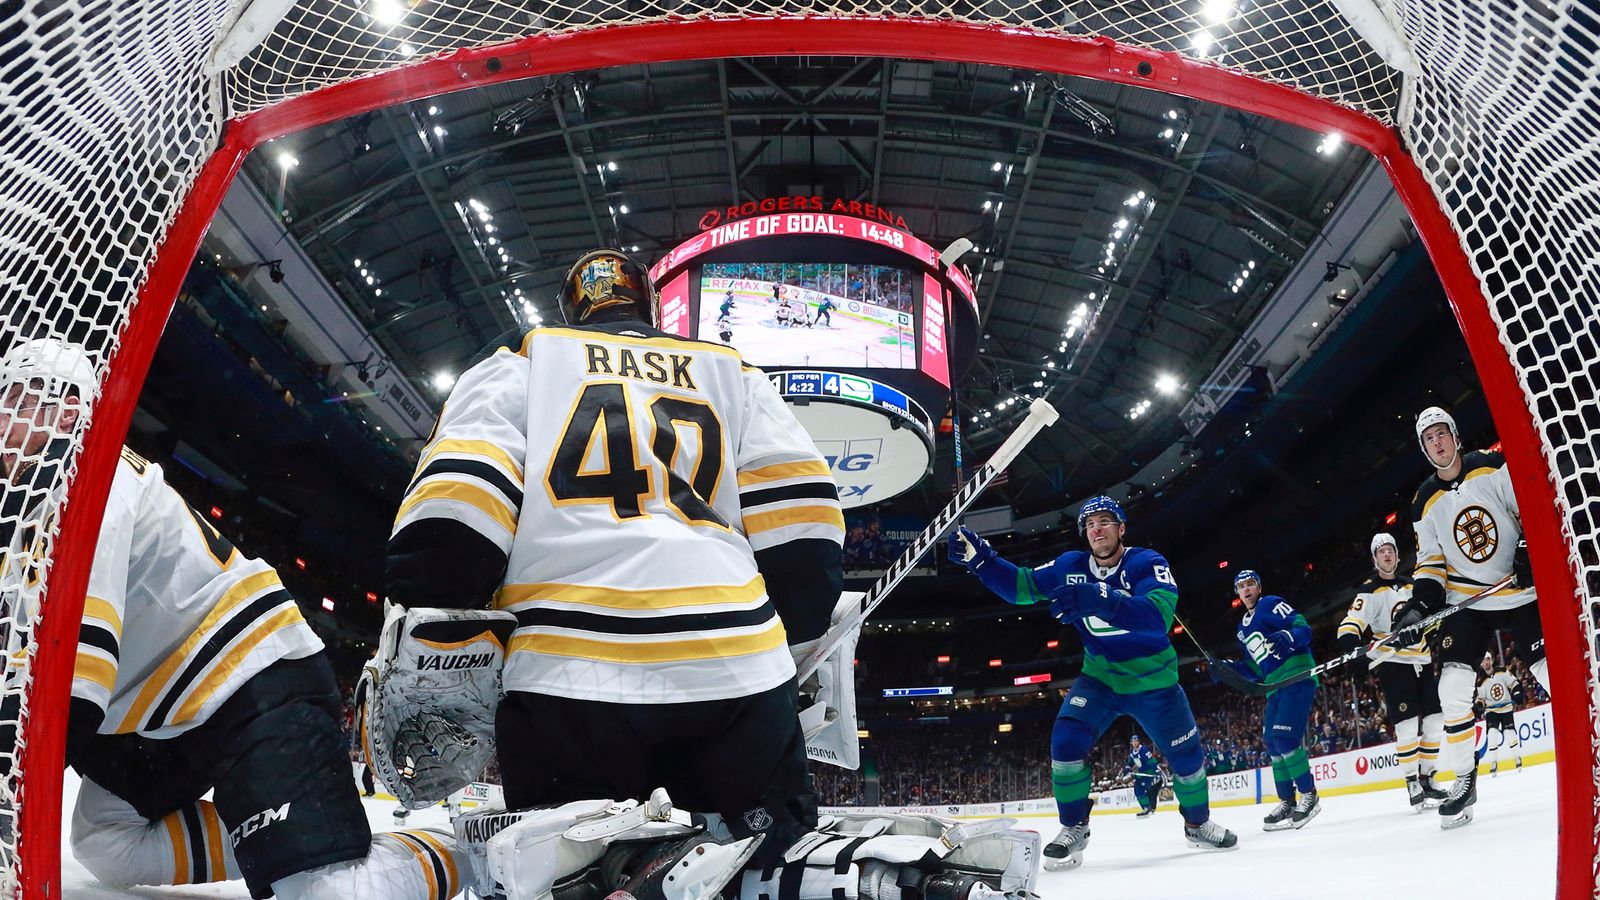 McAvoy scores in season debut, Bruins beat skidding Flames - The